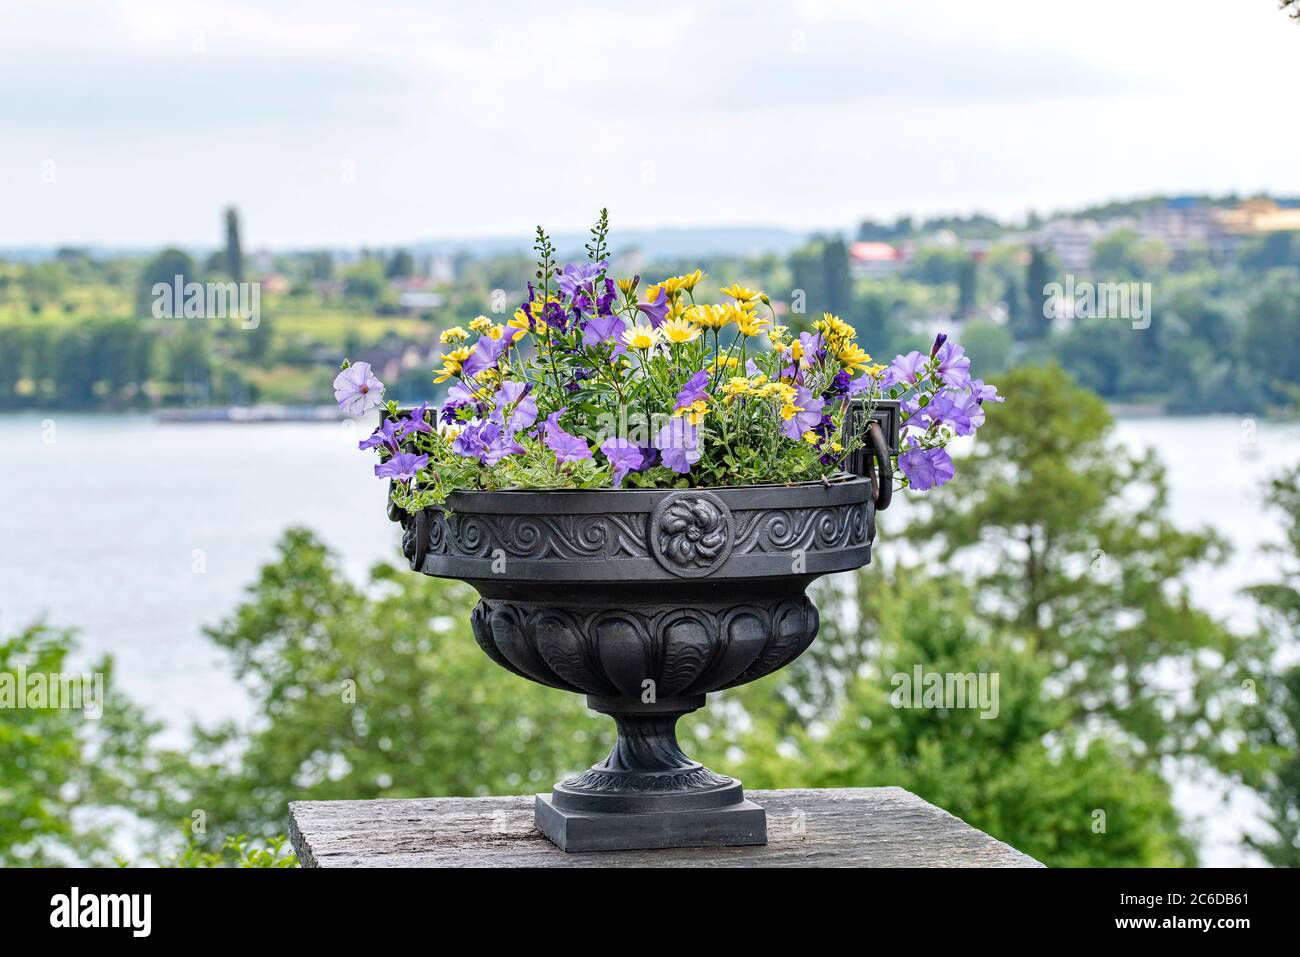 Bepflanzte schale hi-res photography images and stock Alamy 